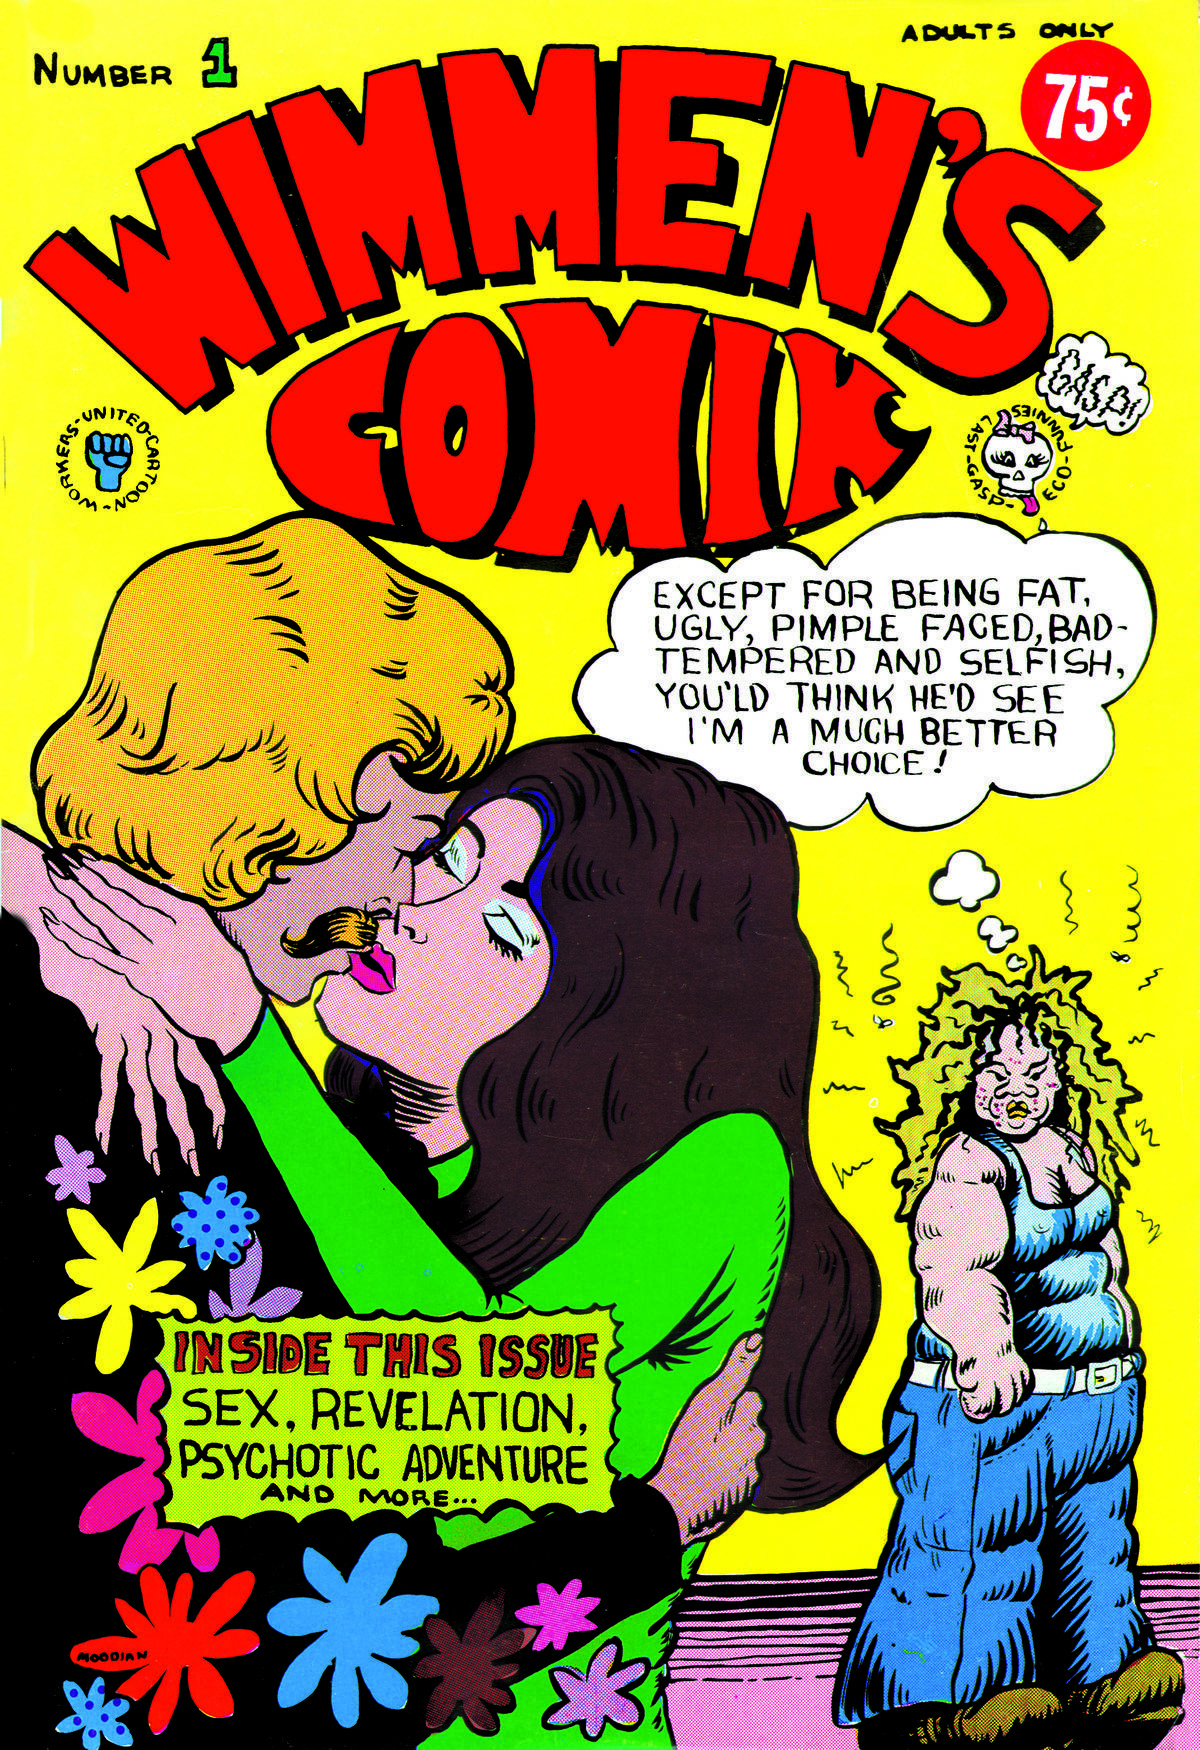 How Feminist Comic Book “Wimmen's Comix” Fought Chauvinism